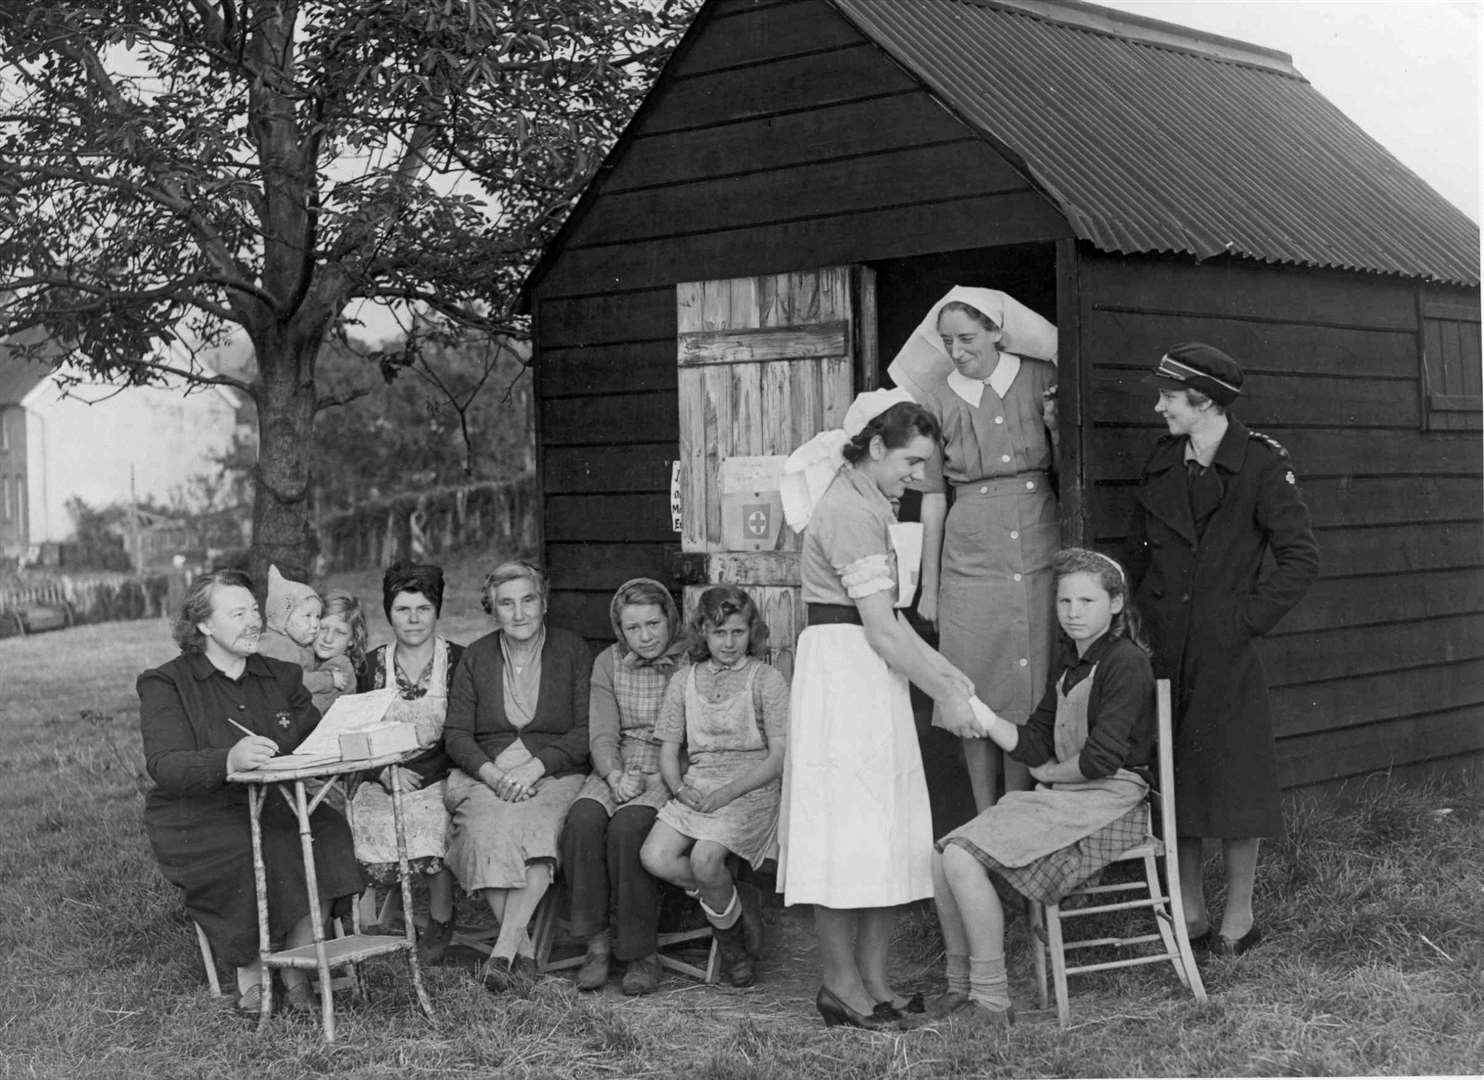 British Red Cross members checking on the health of hoppers at Tutsham Hall, East Farleigh, in the 1950s